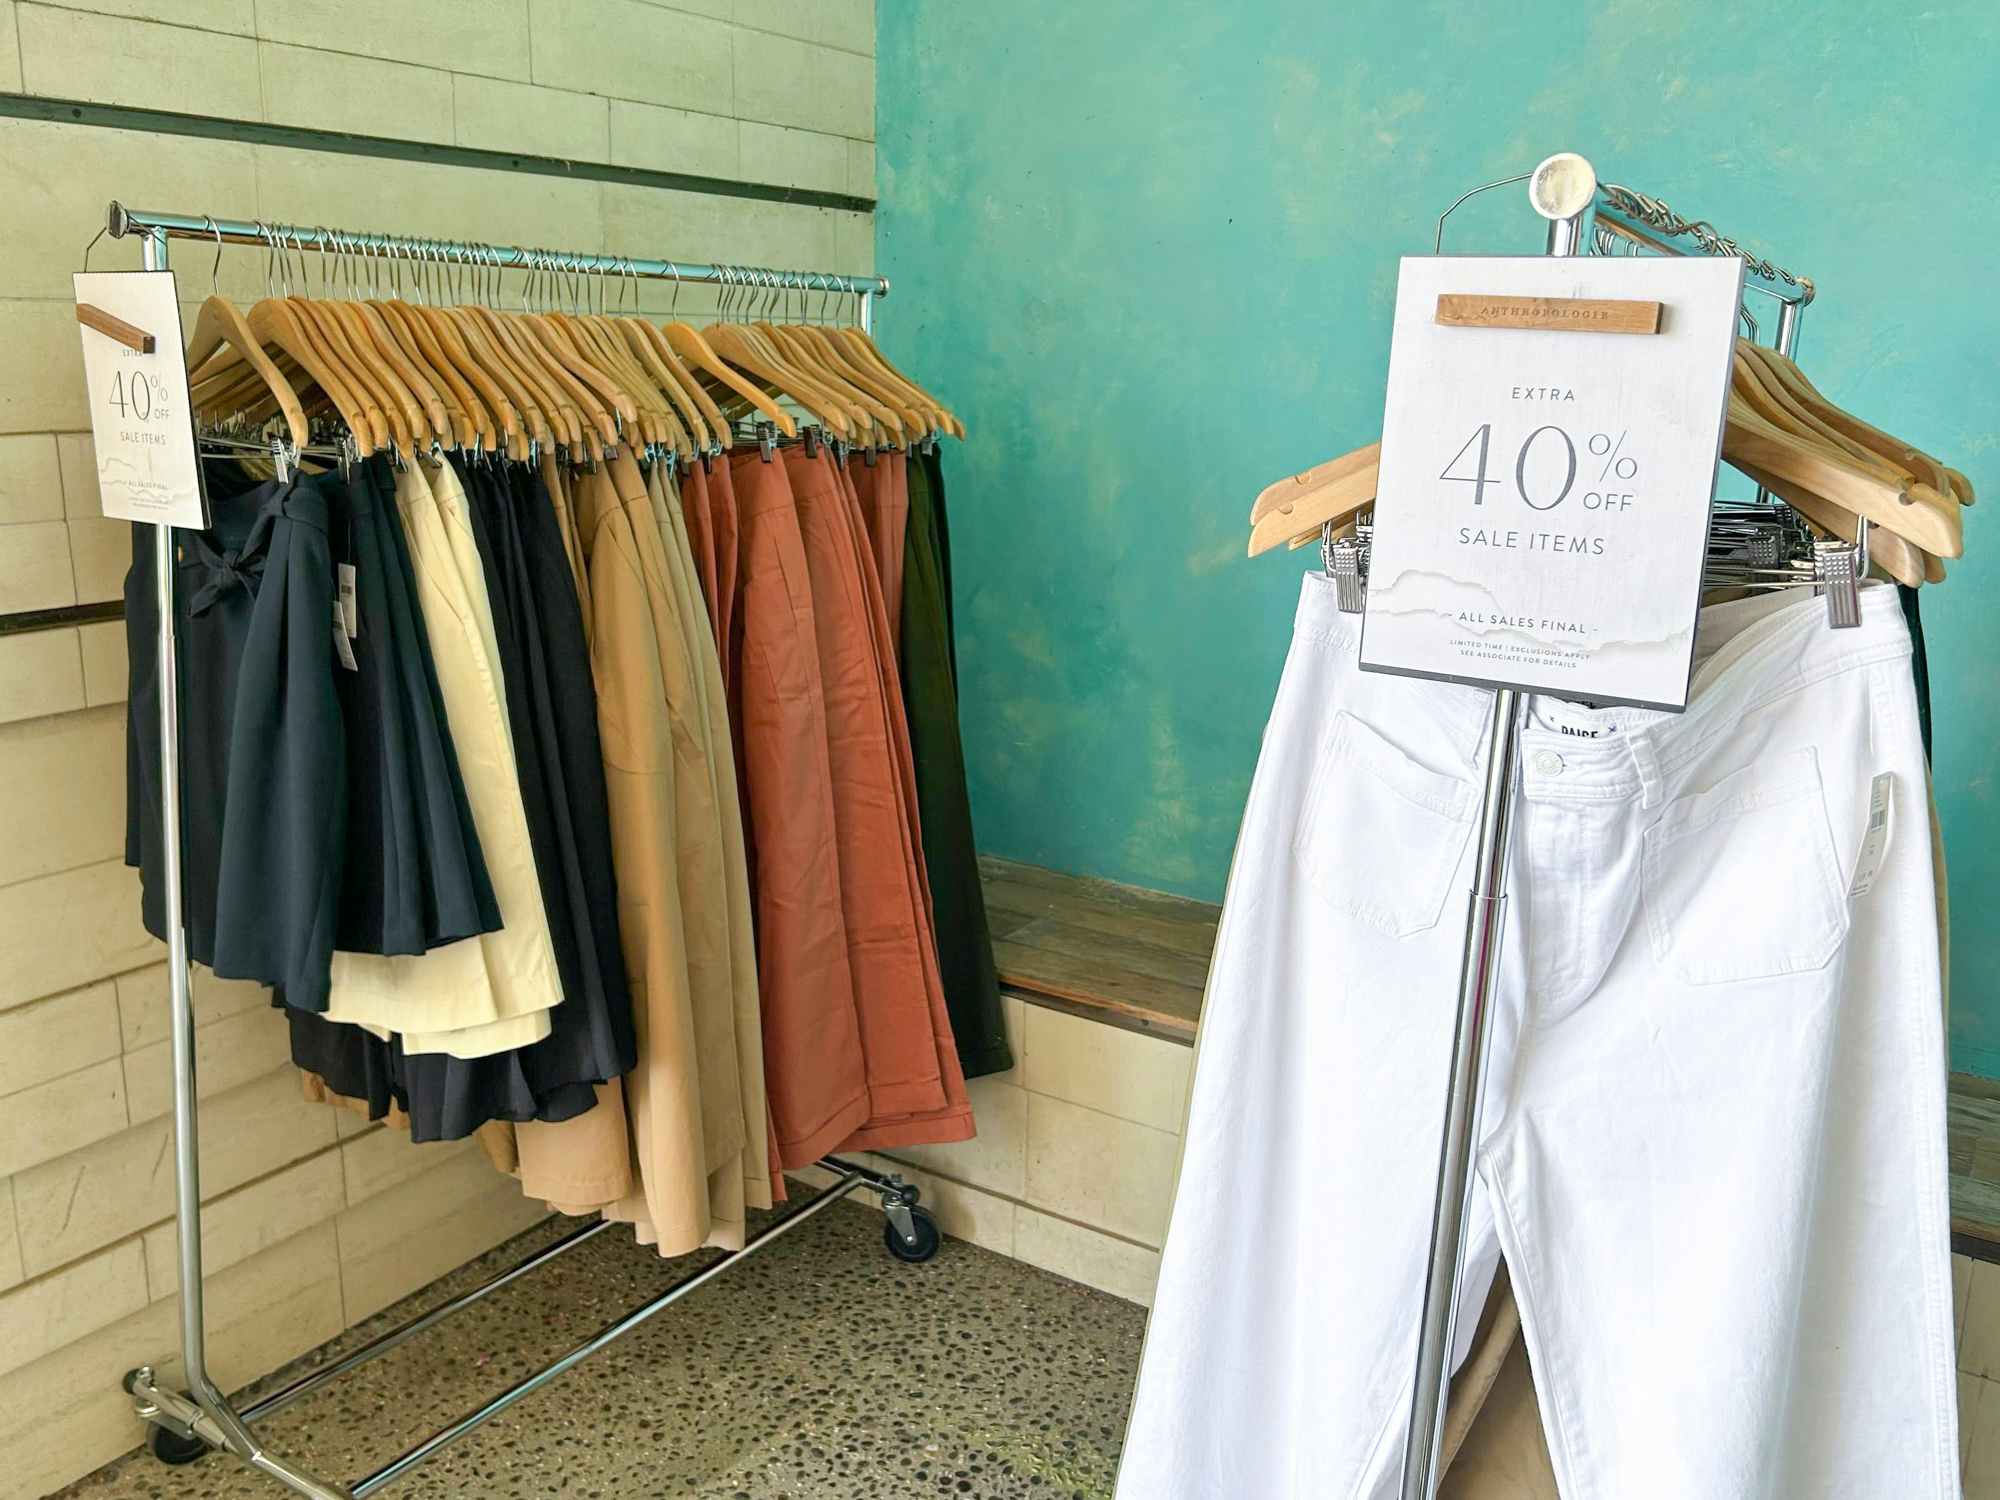 Clothing hanging on a rack at Anthropologie with signs advertising 40% off sale items